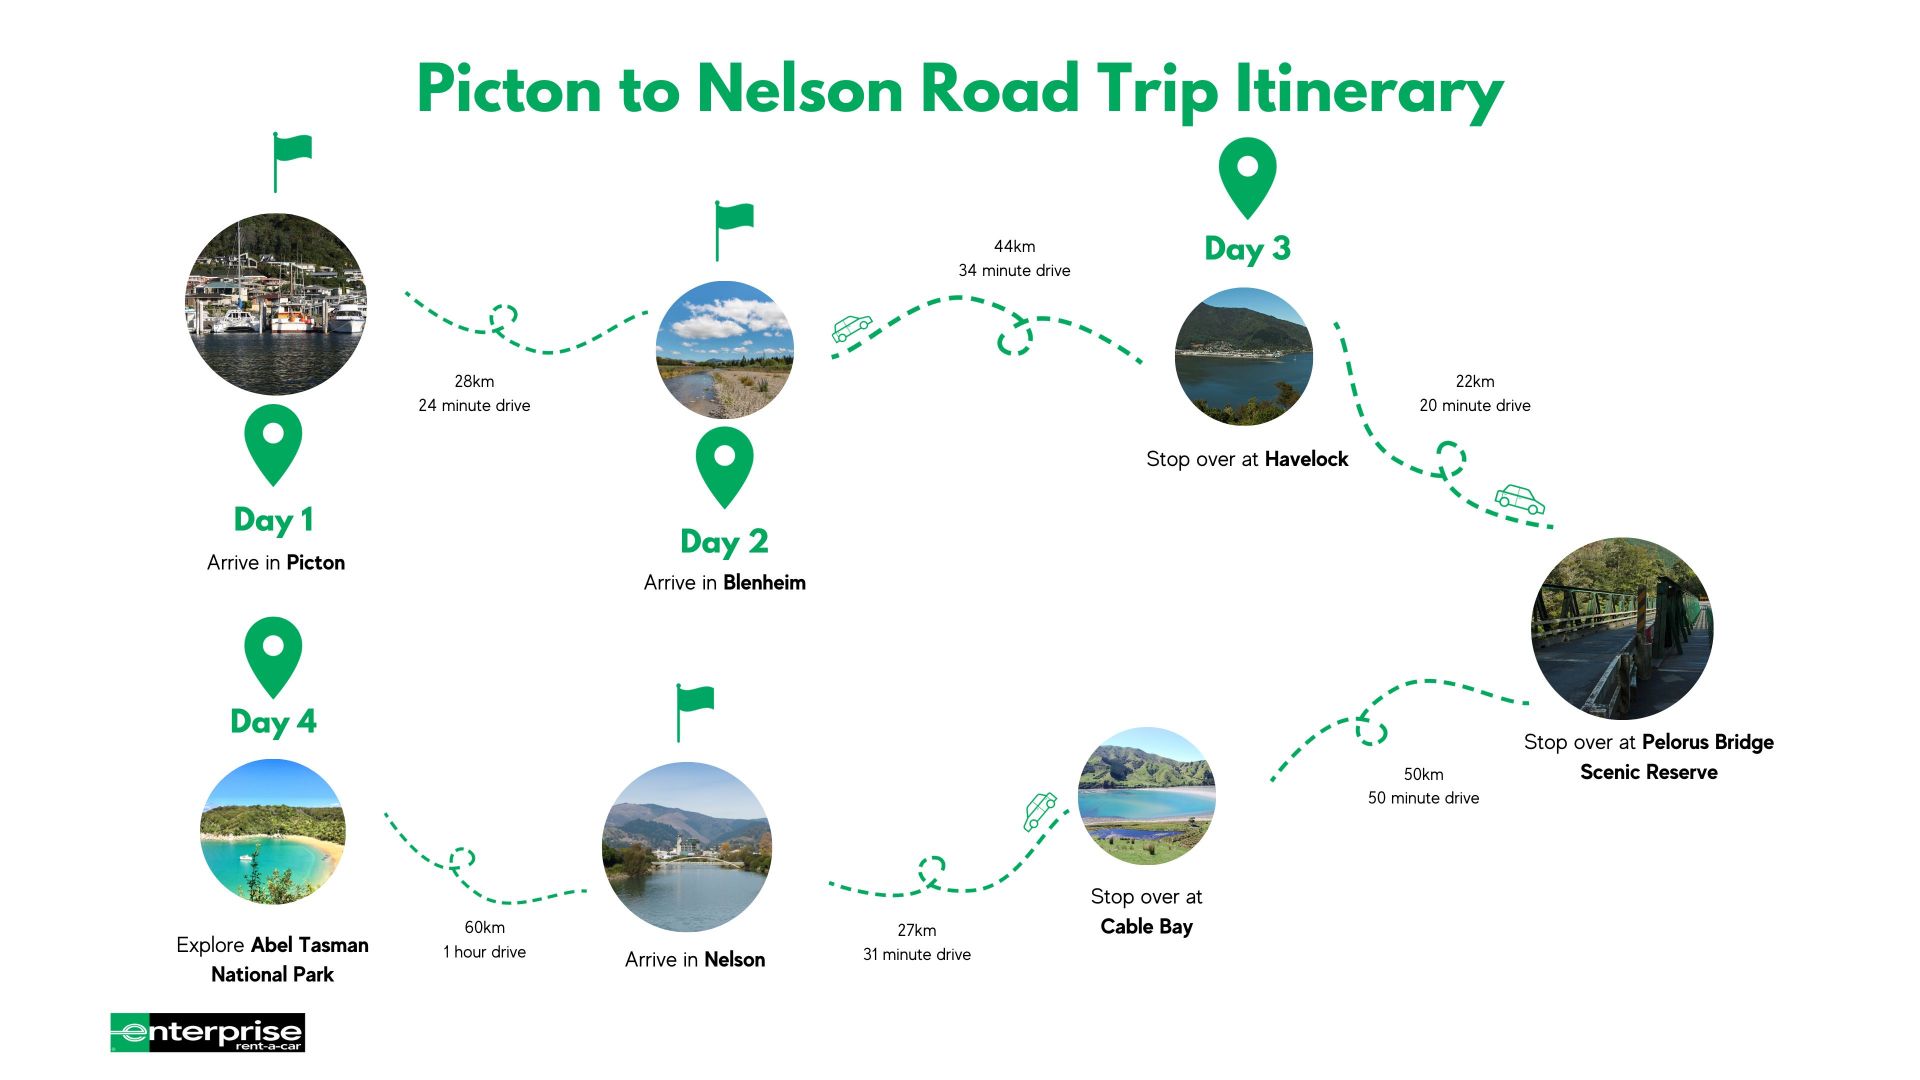 Picton to Nelson Road Trip Itinerary